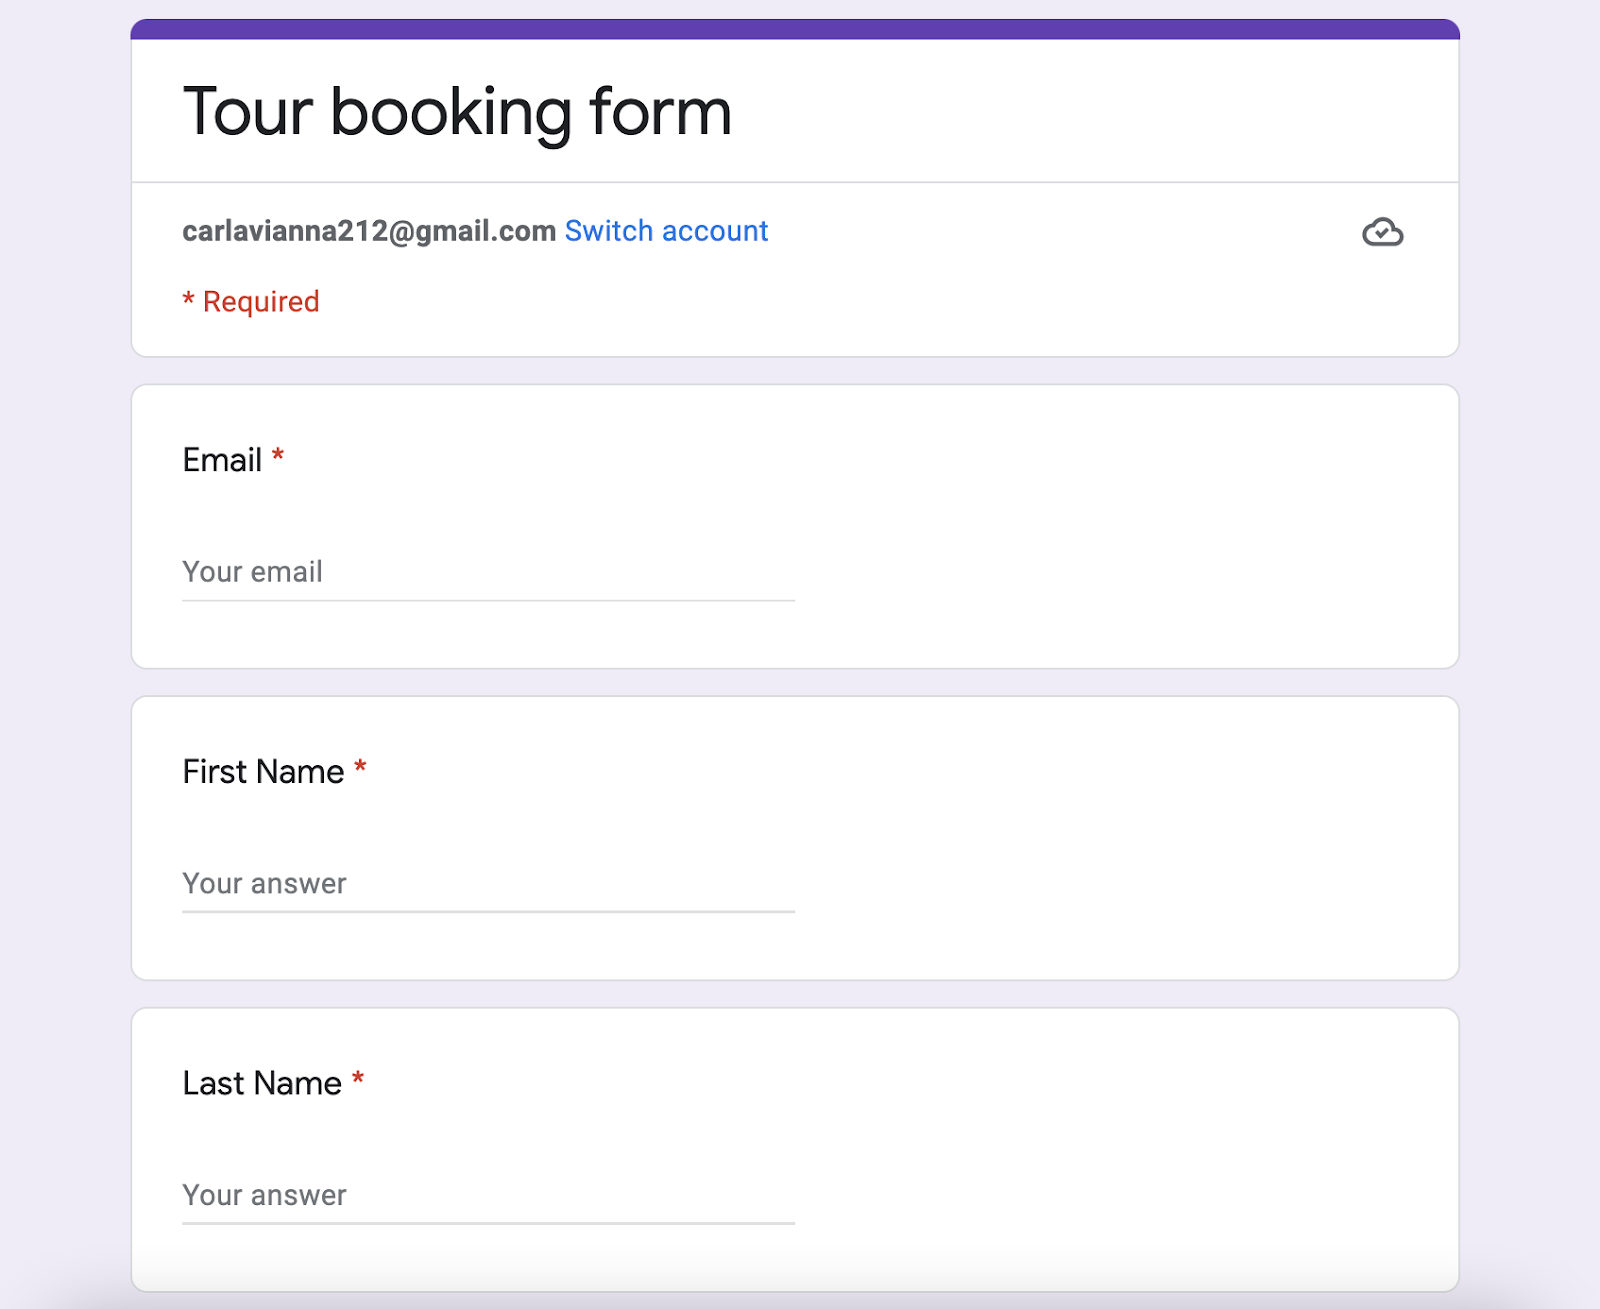 Tour booking form example